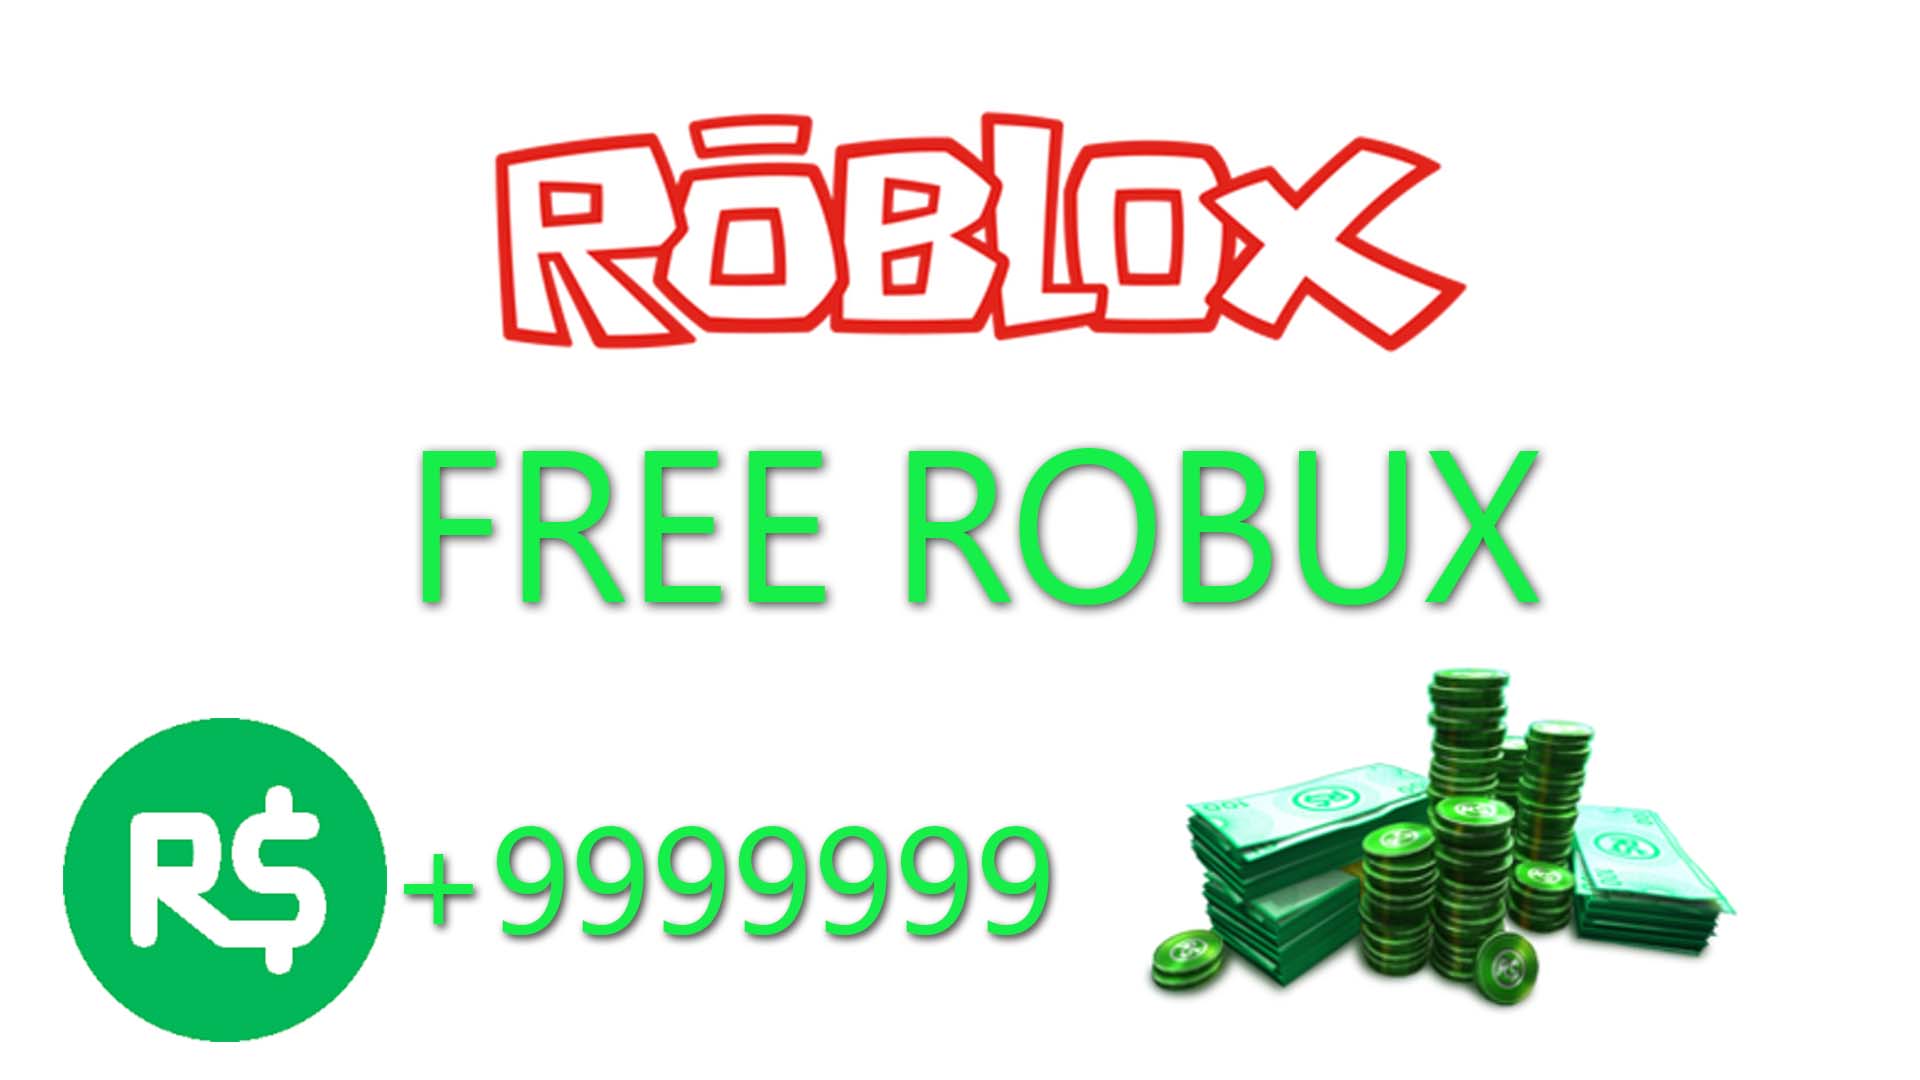 hack robux roblox tips techkeyhub succeed